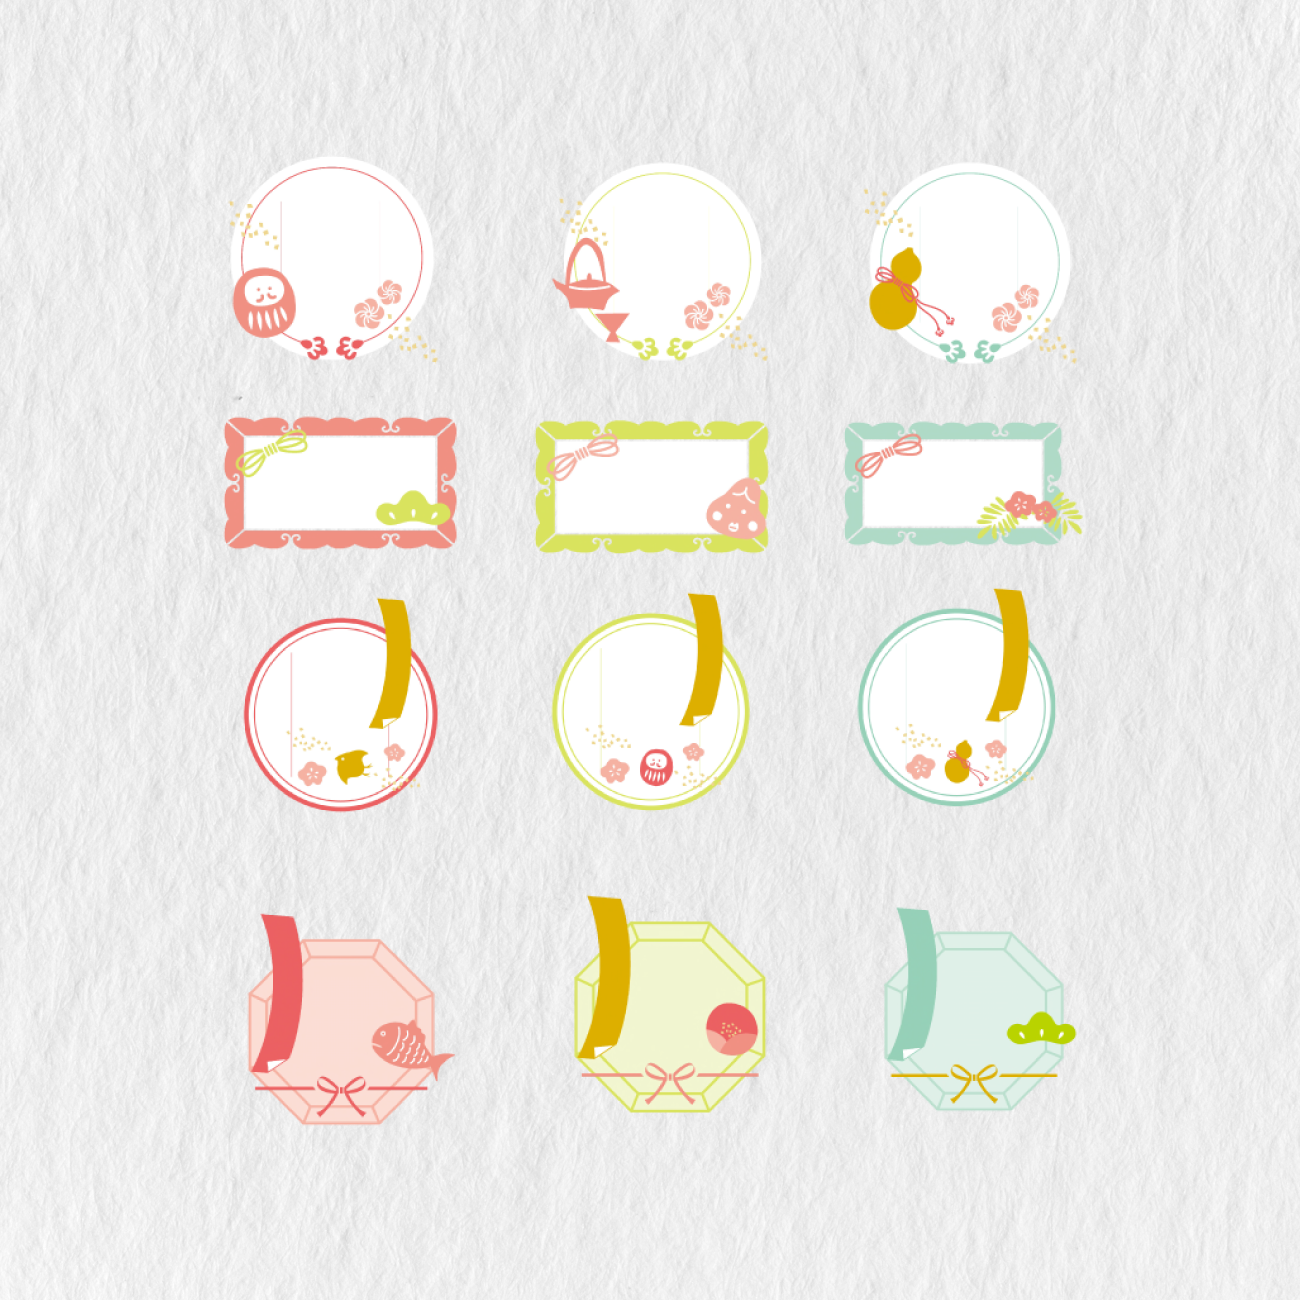 214 Goodnotes Notability Digital Japanese Stickers — Stationery Pal